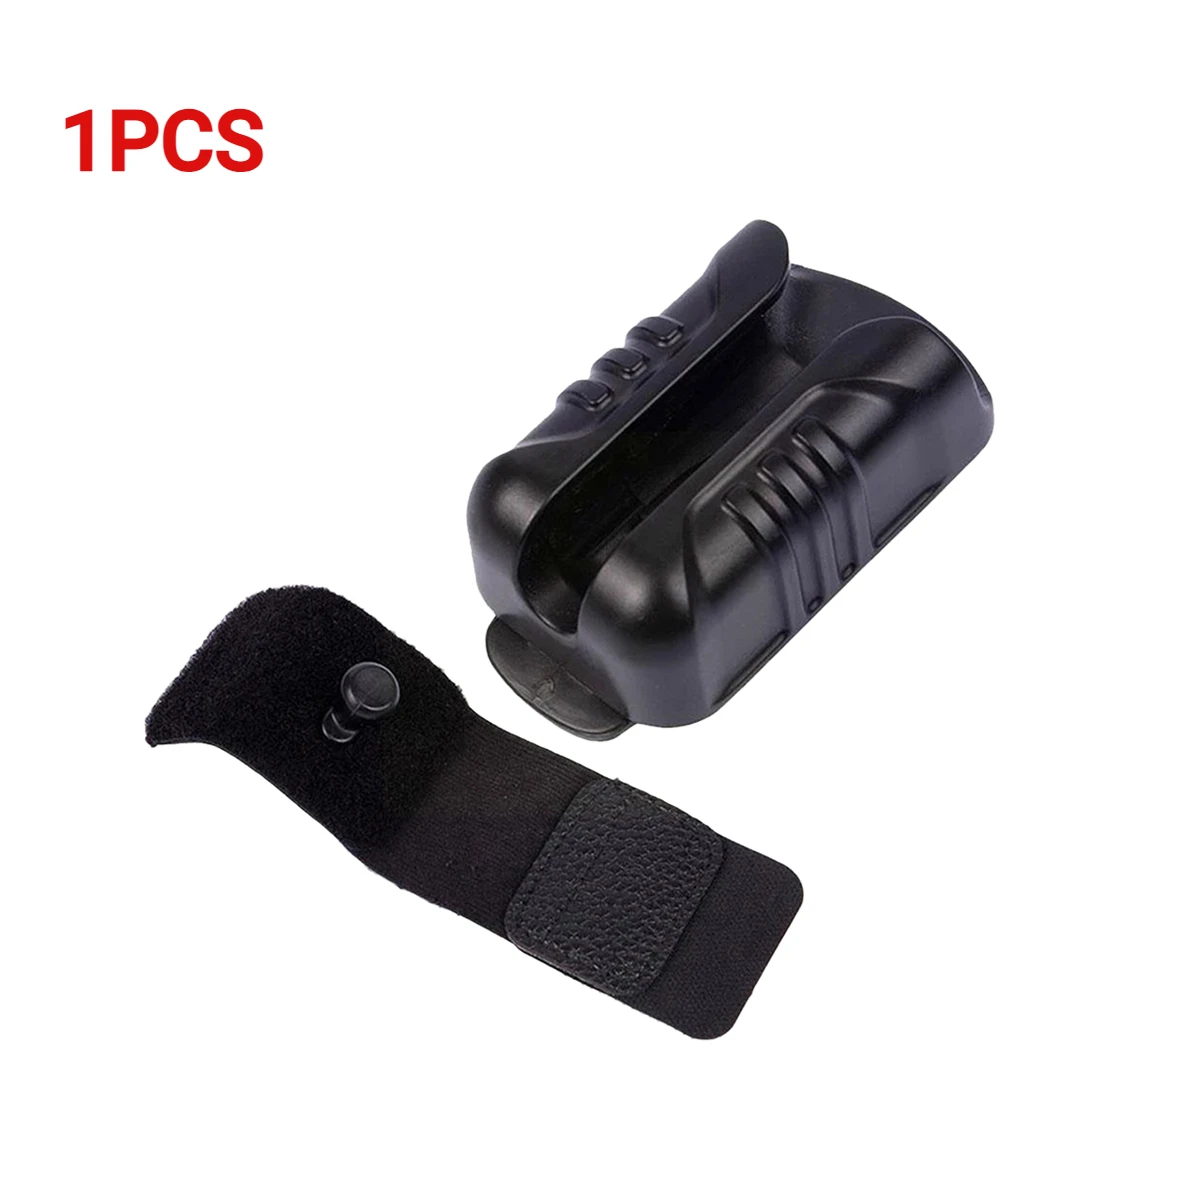 1-10PCS Waist Tool Set Tool Holster Multi-functional Electric Drill Port... - $59.71